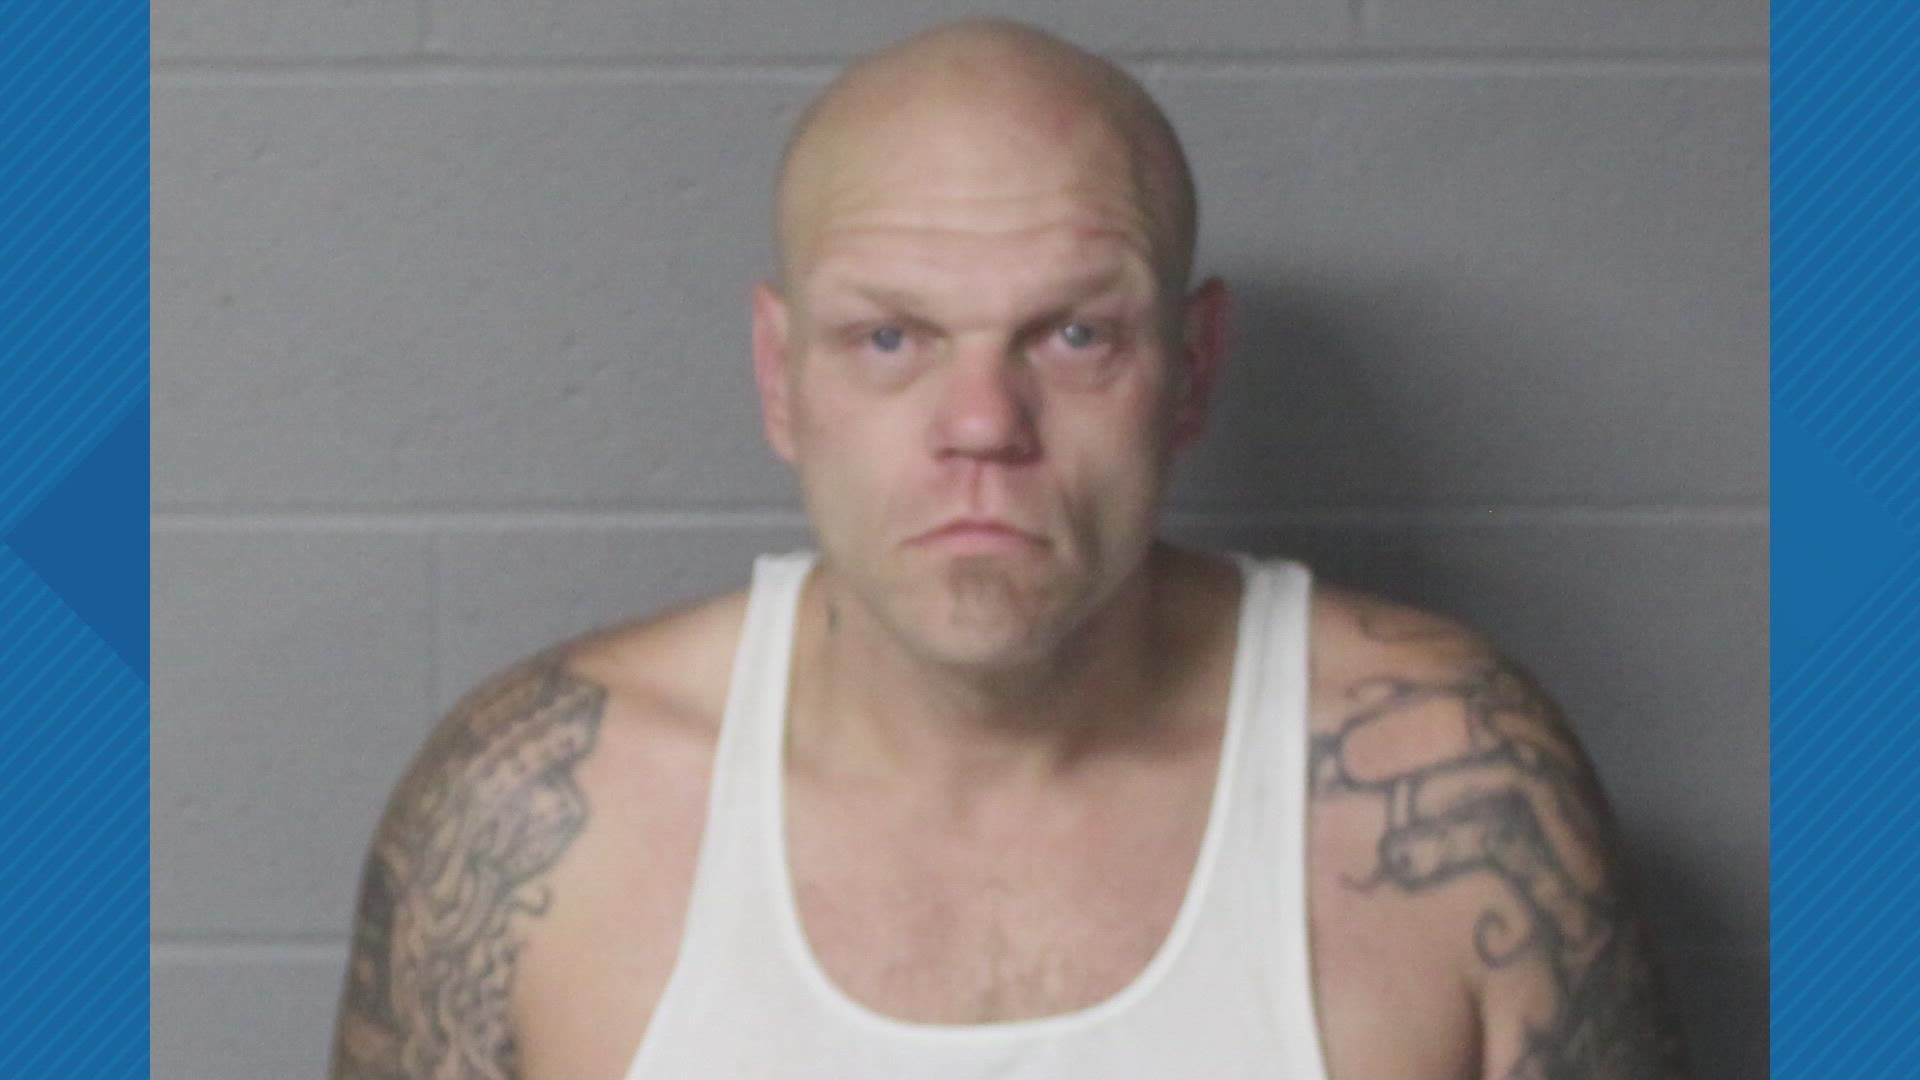 St. Louis police said the man suspected of shooting and killing Ronald Cline Jr. and Leslie Barstow was arrested after crashing his car on Interstate 55.